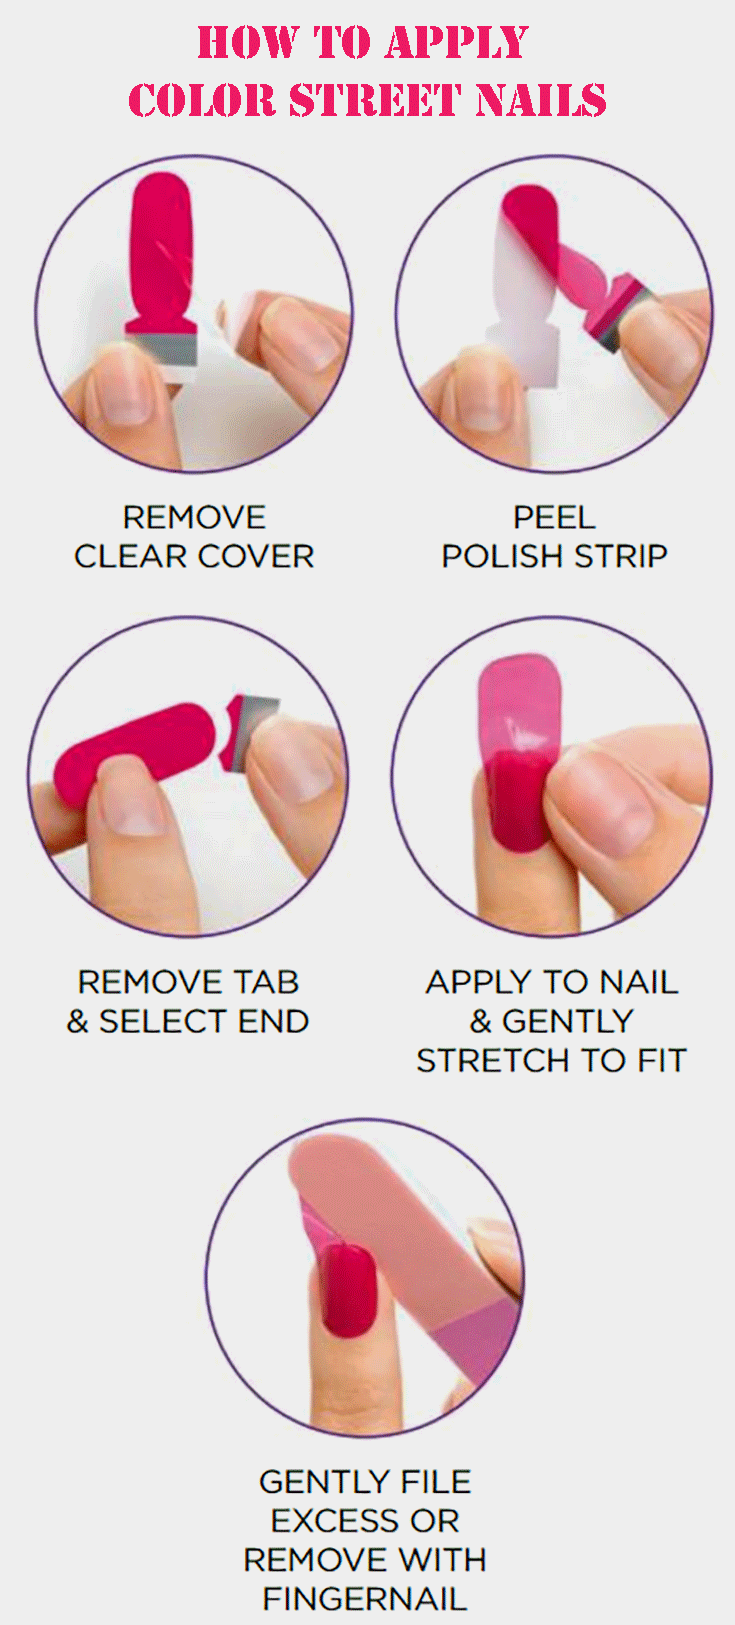 How to apply color street nails